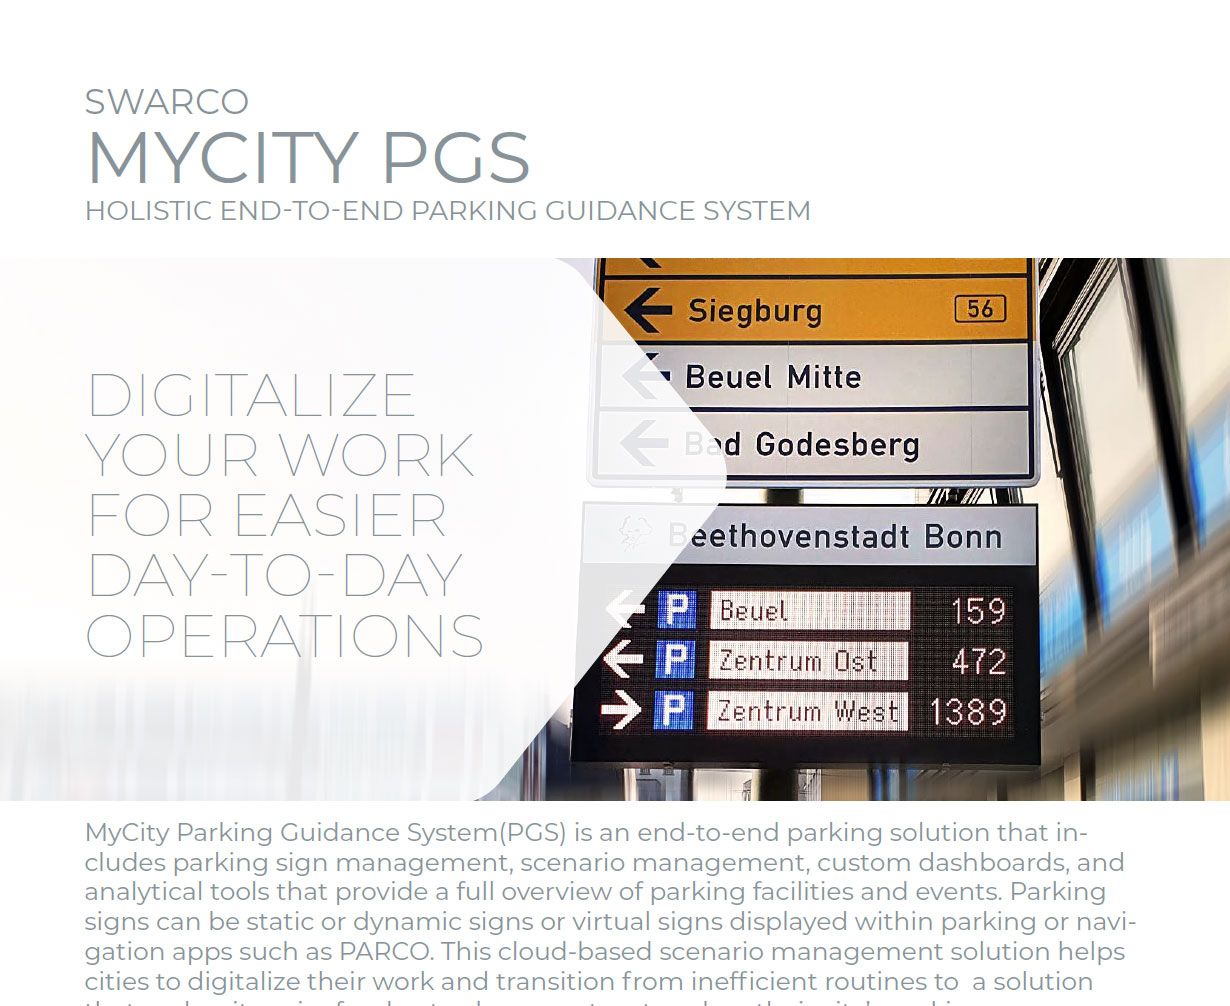 SWARCO MyCity Parking Guidance System (PGS)